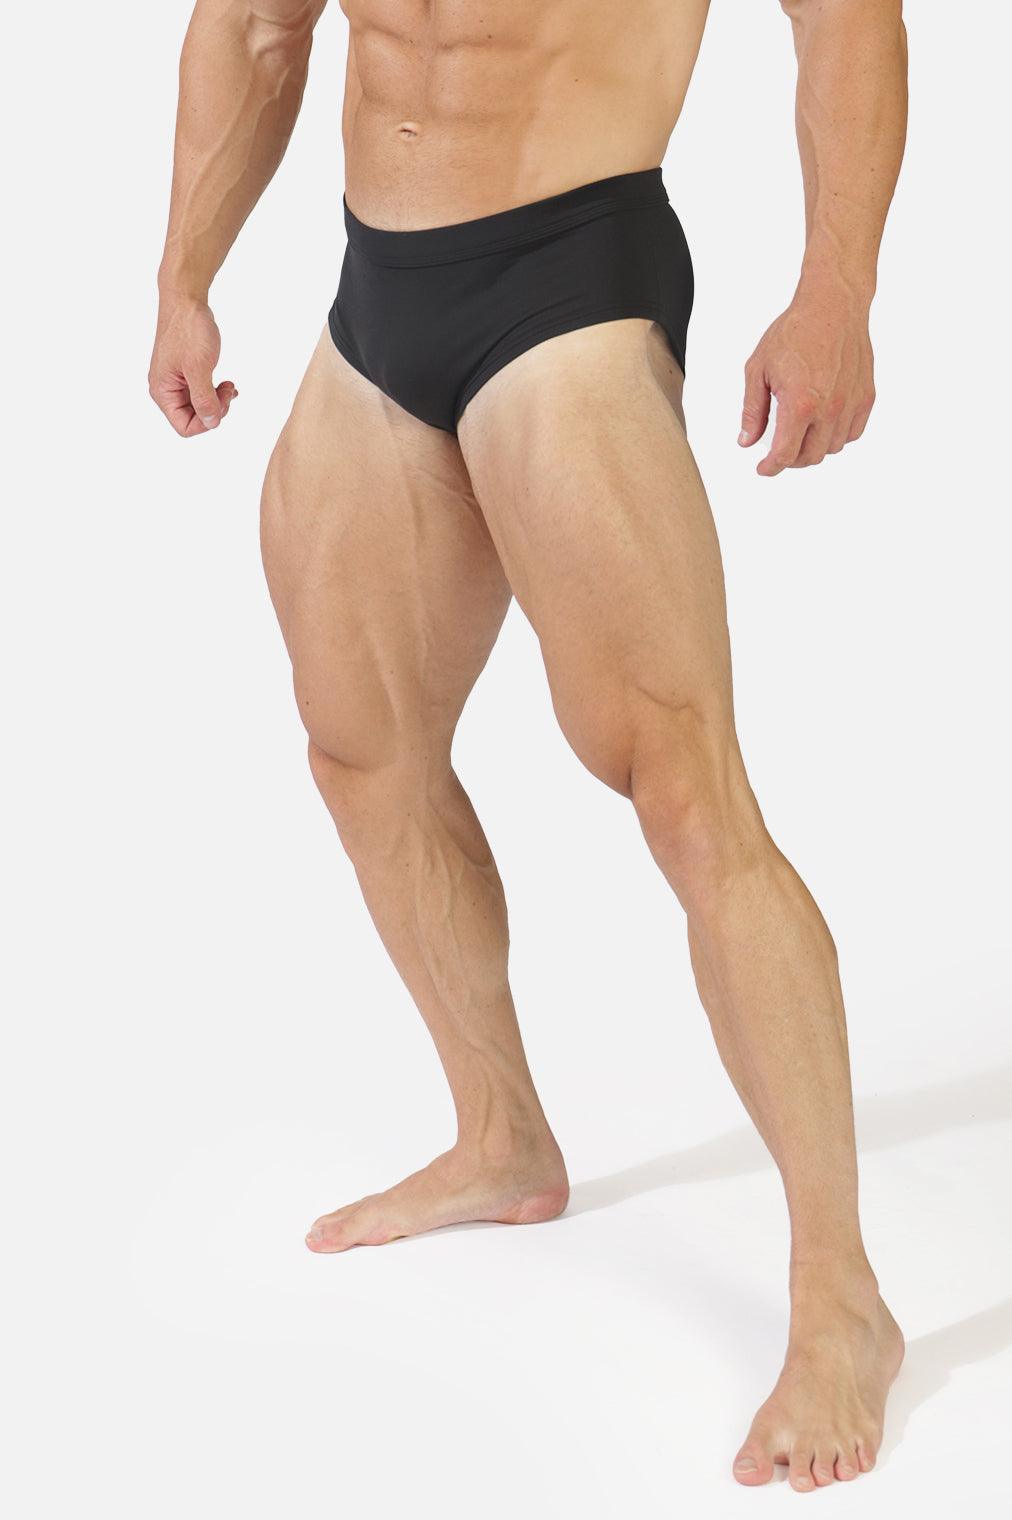 Bodybuilding Posing Trunks, Competition Posing Suits India | Ubuy